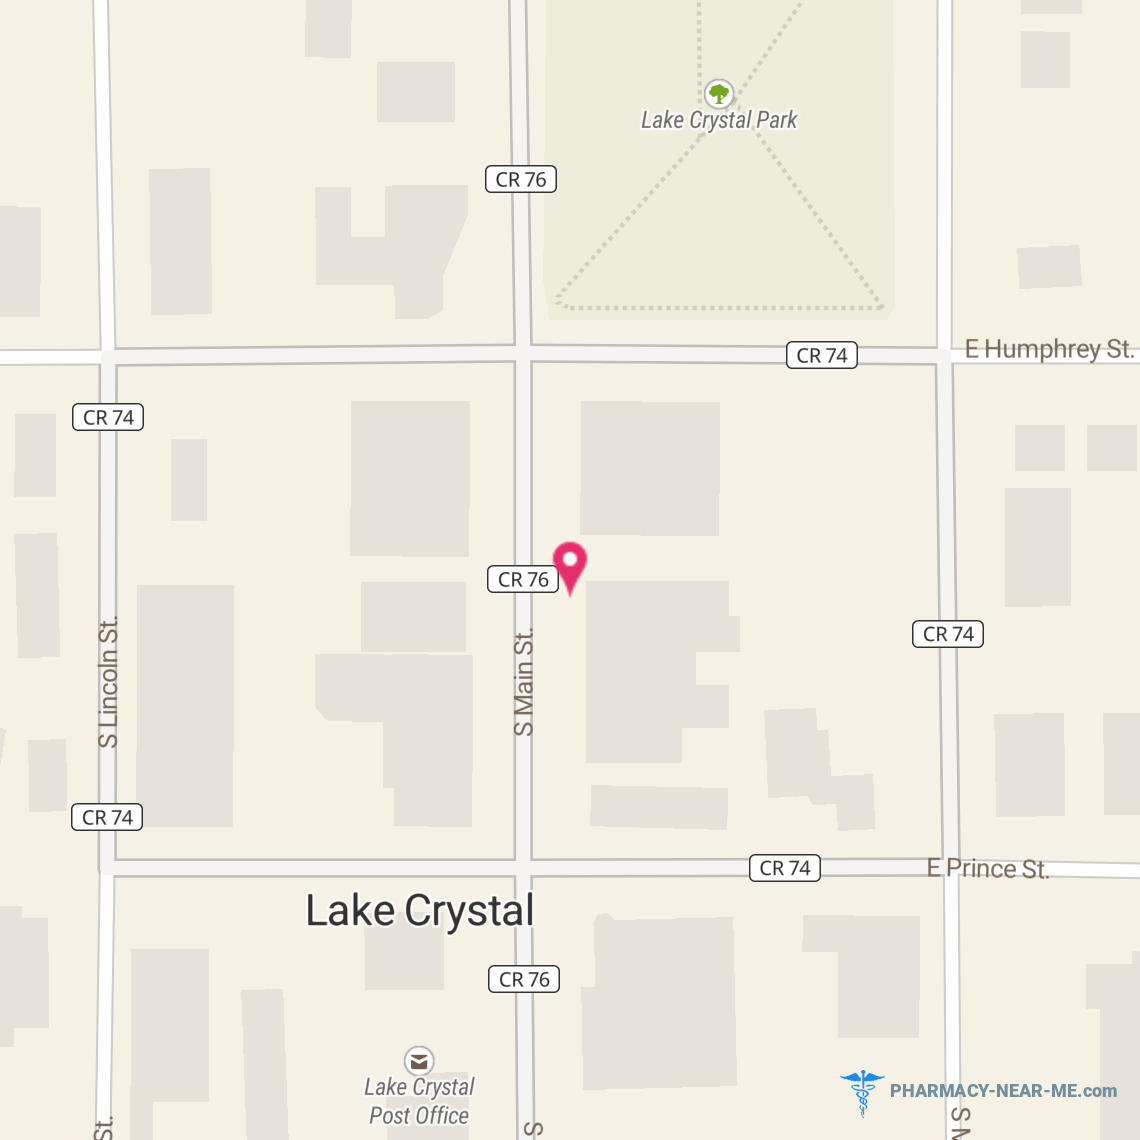 CRYSTAL DRUG STORE - Pharmacy Hours, Phone, Reviews & Information: 142 South Main Street, Lake Crystal, Minnesota 56055, United States